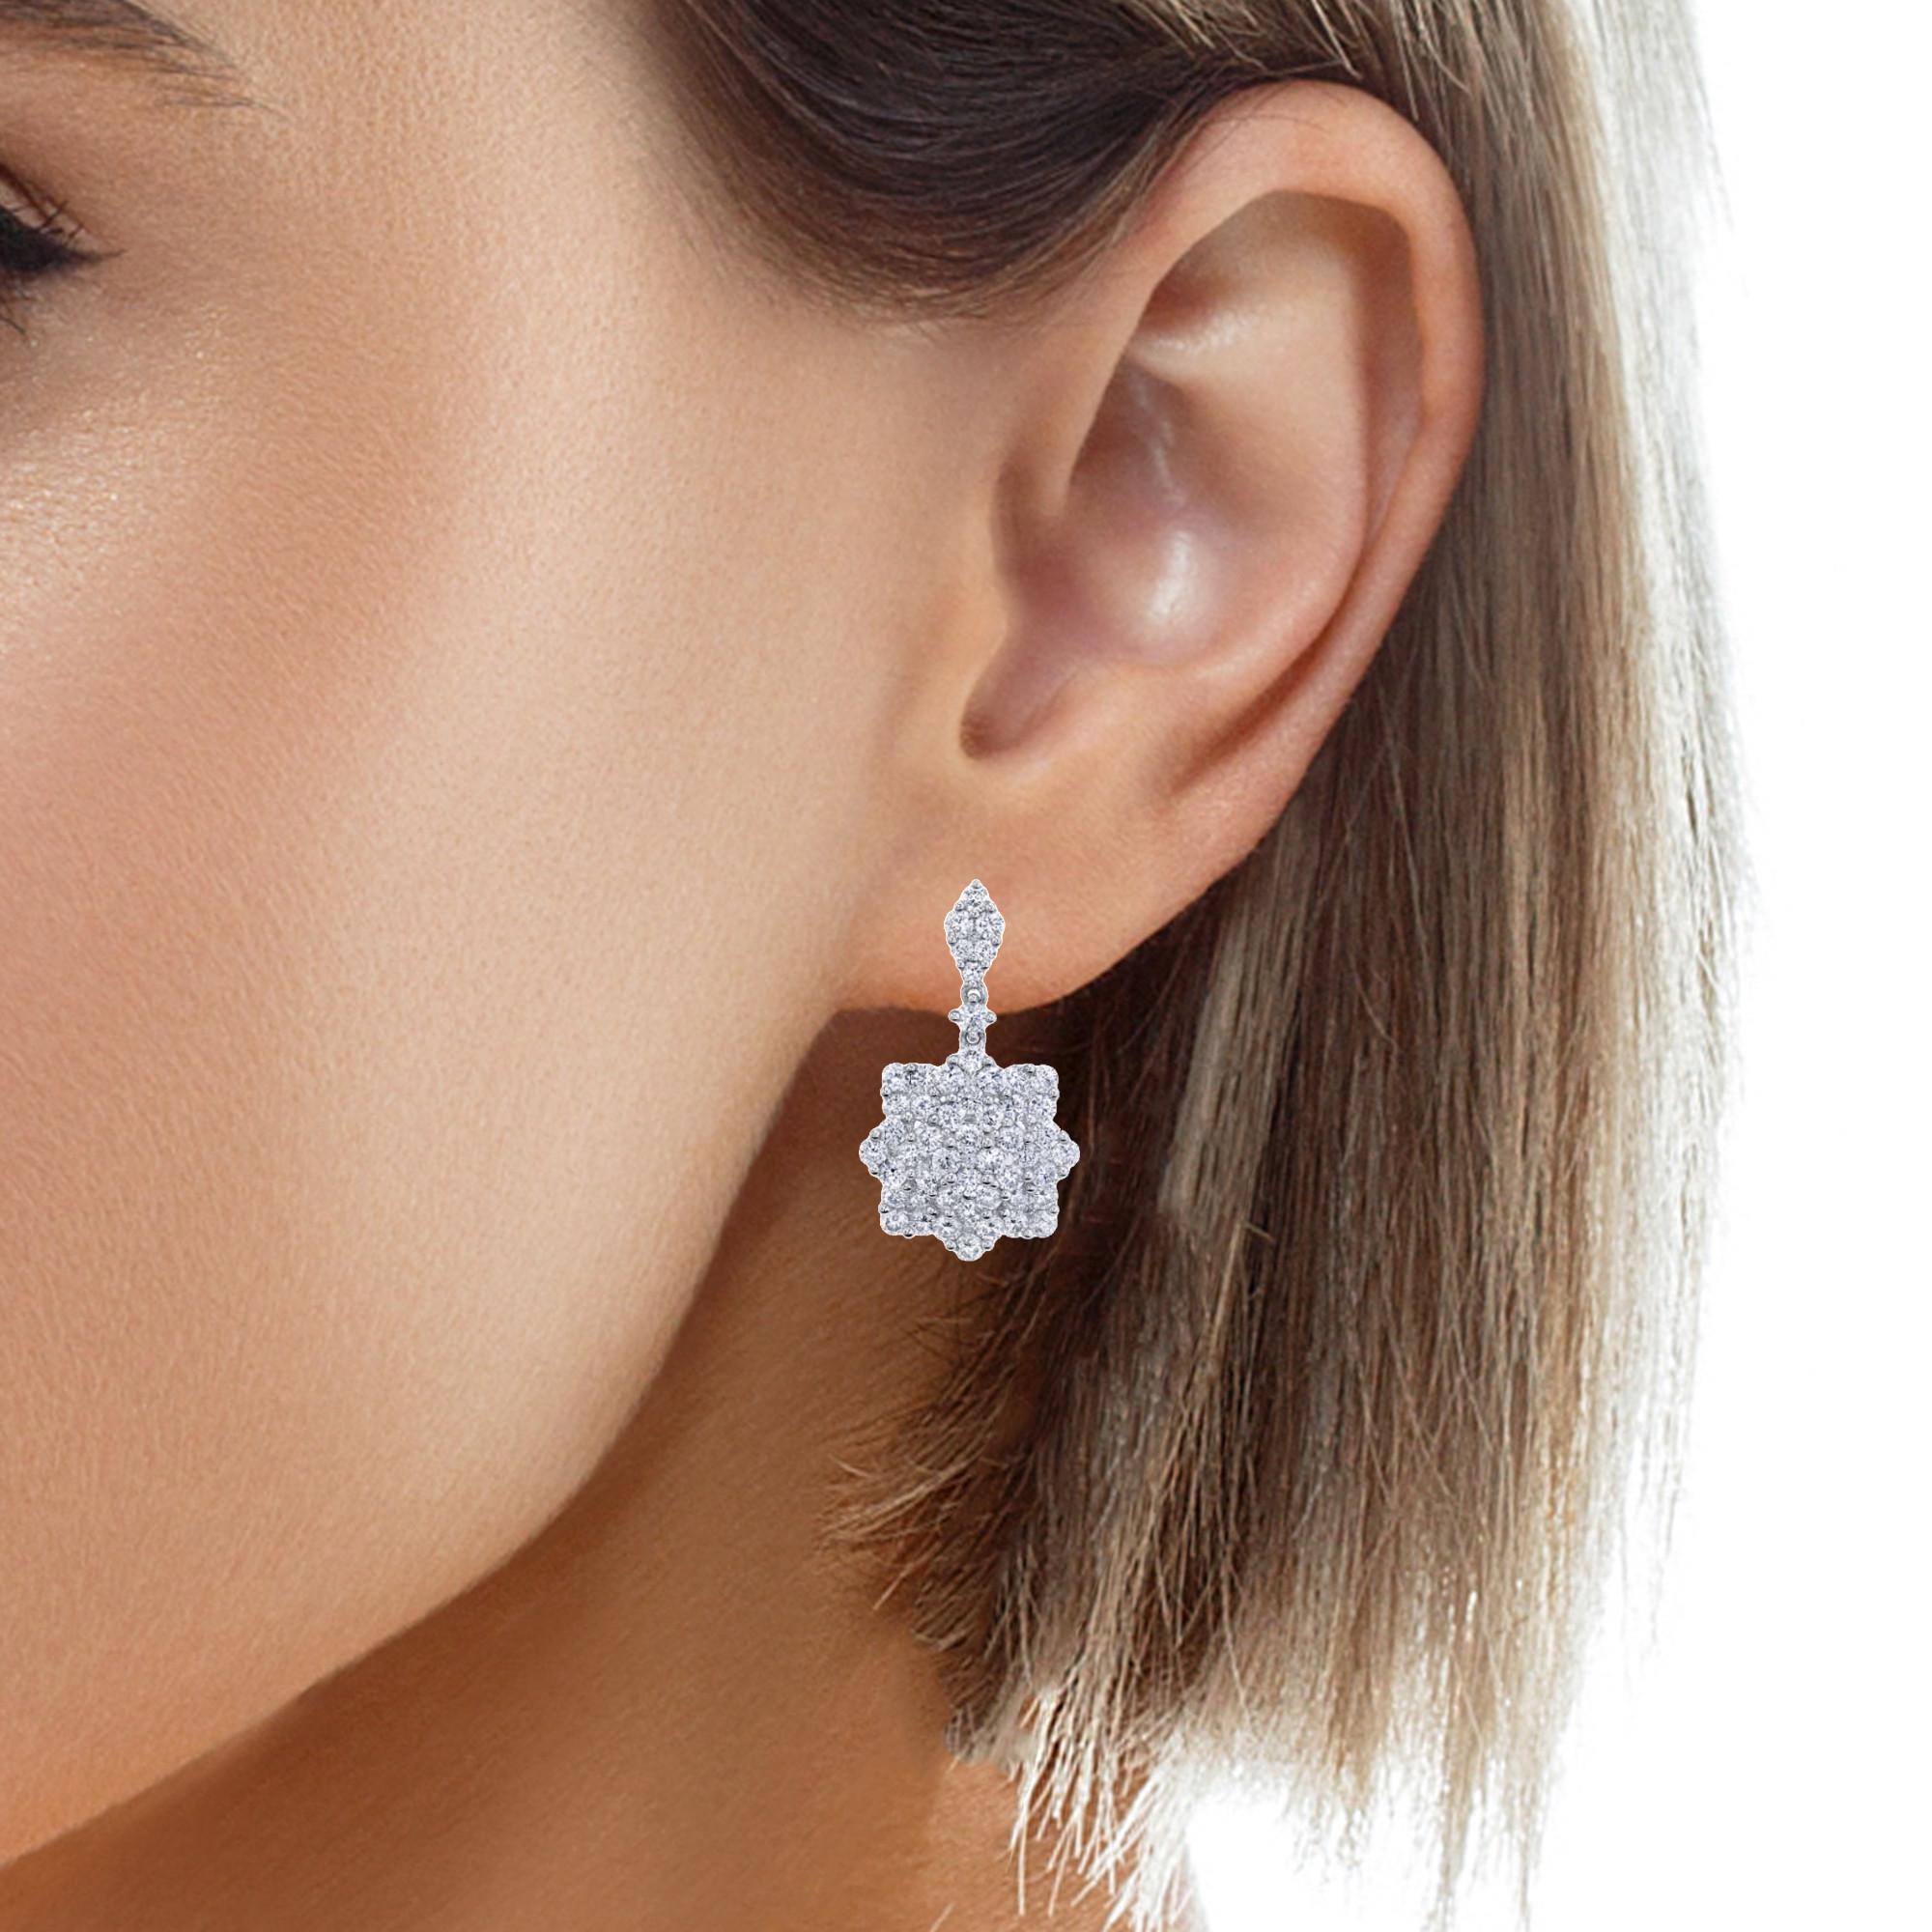 Diamond Snowflake Drop Earrings in White Gold, 3.34 Carats Total For Sale 2